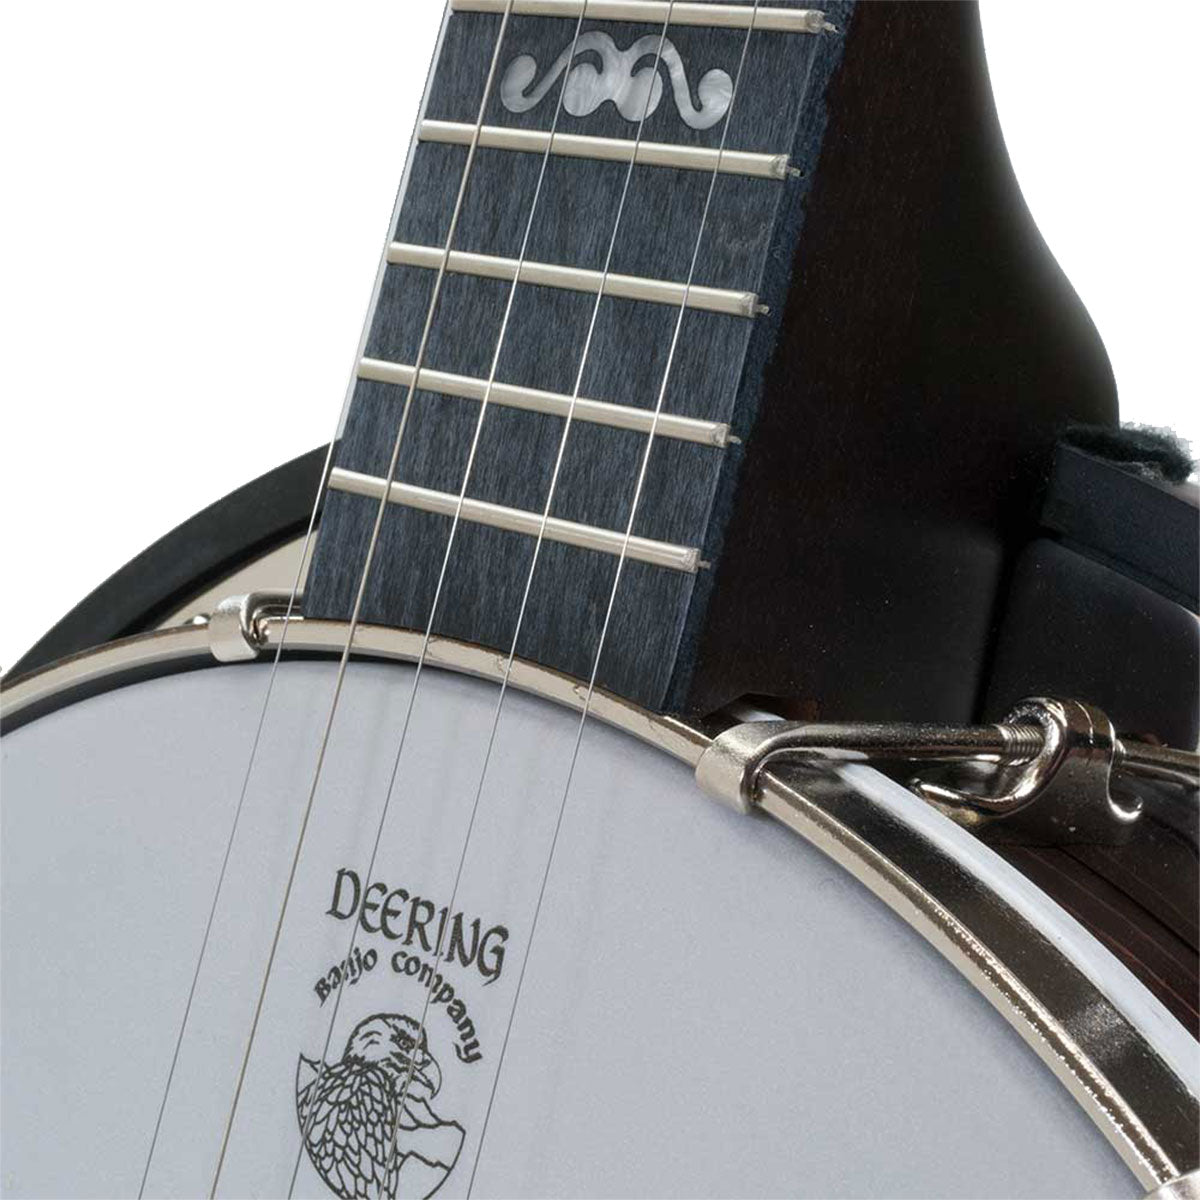 Detail image of Deering Artisan Goodtime Two 5-String Banjo with Resonator showing intersection of neck and body